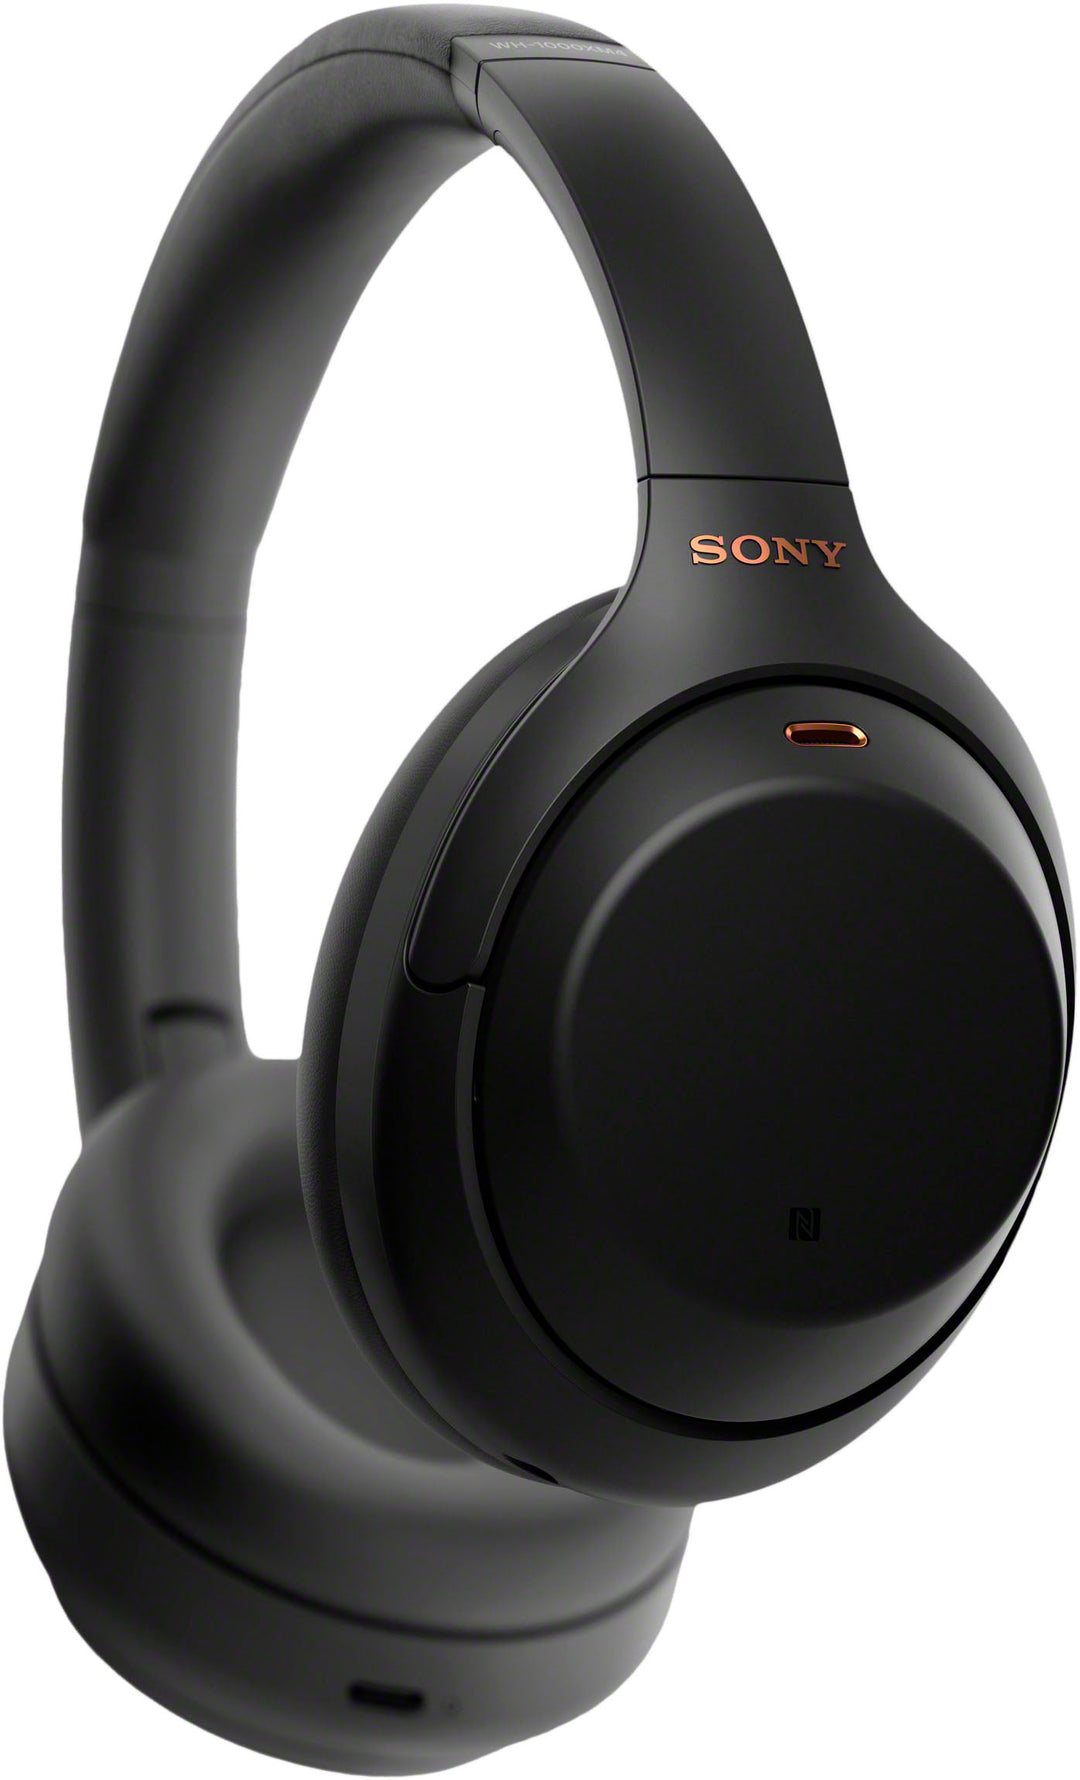 Sony - WH-1000XM4 Wireless Noise-Cancelling Over-the-Ear Headphones - Black_1